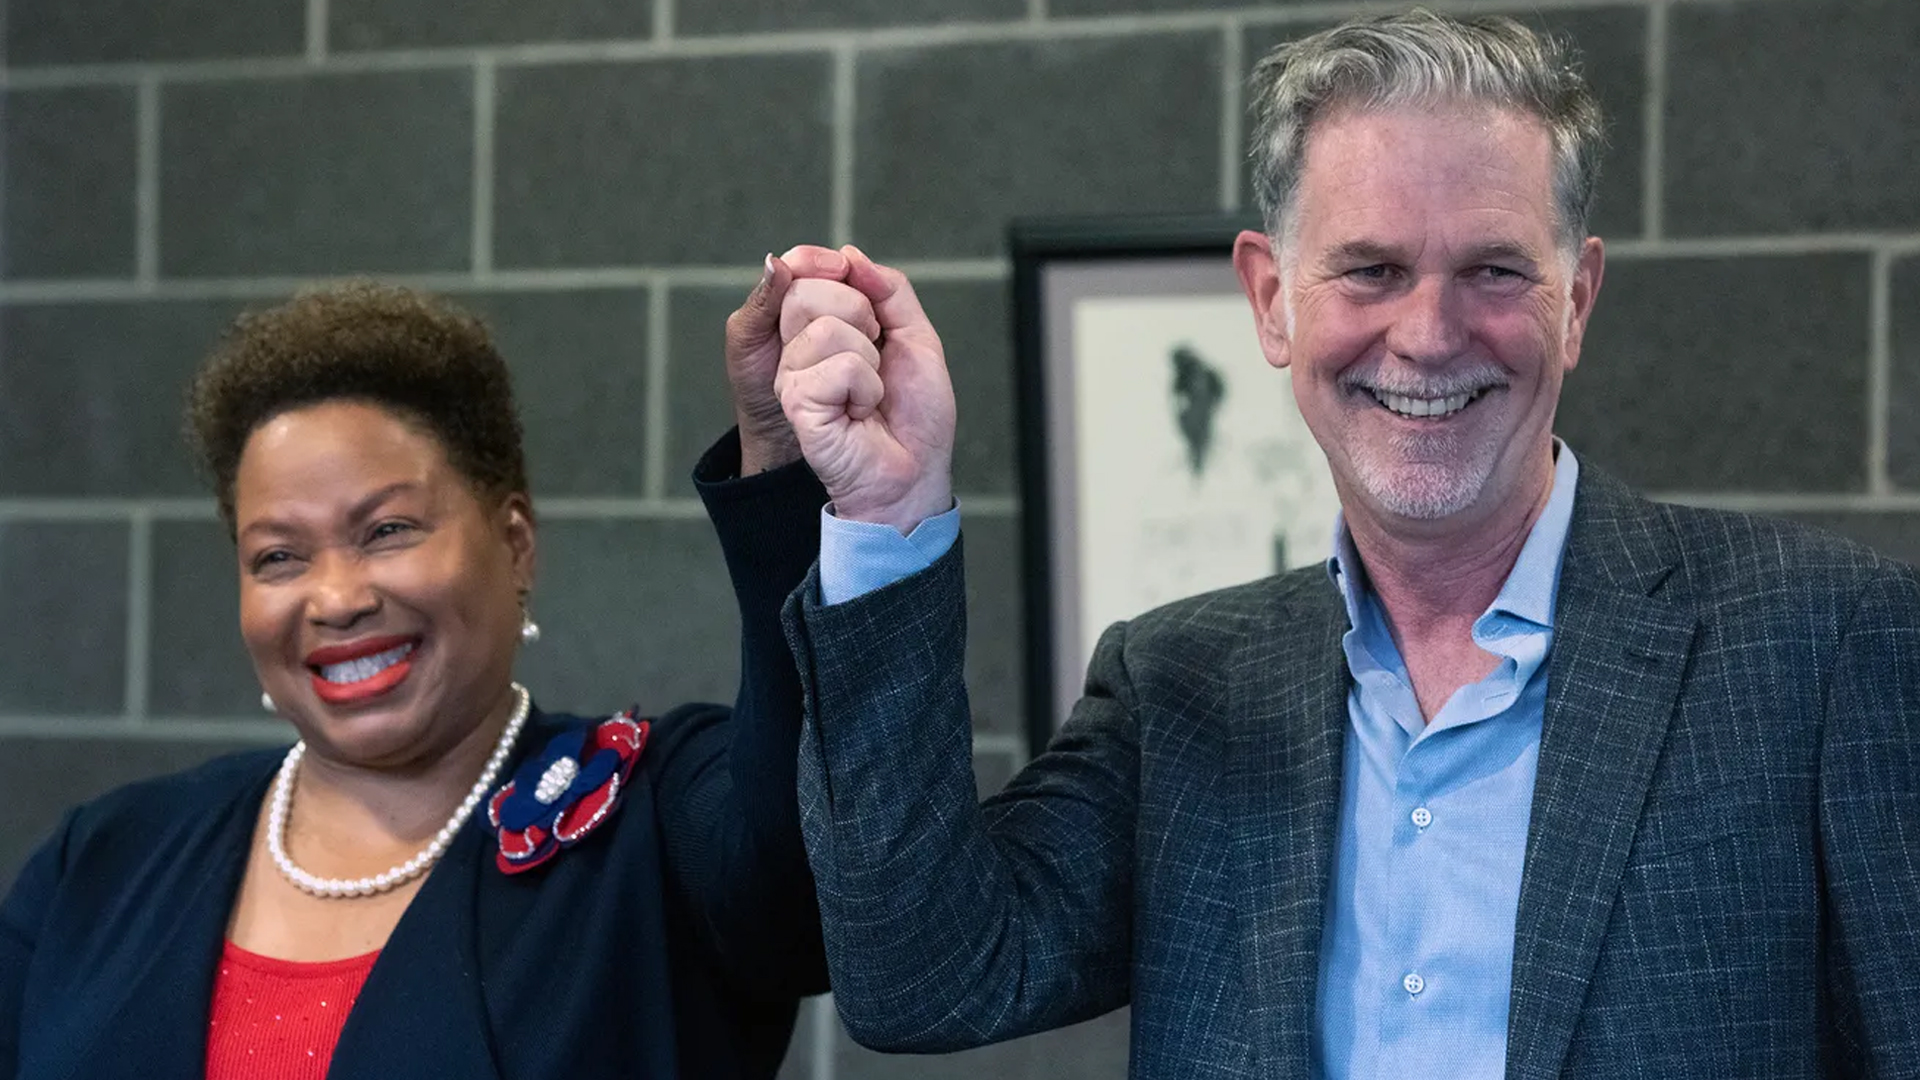 Mississippi HBCU Receives $10M Donation From Netflix's Co-CEO Reed Hastings And Wife Patty Quillin